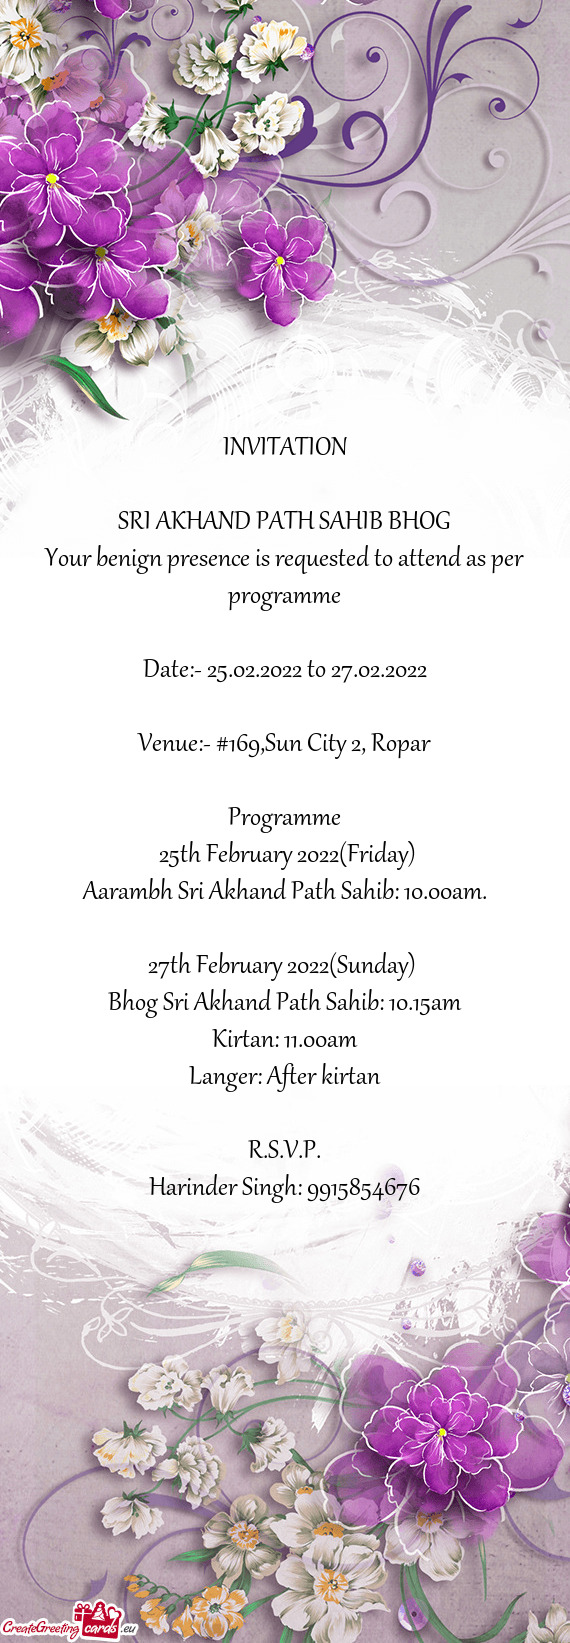 Your benign presence is requested to attend as per programme